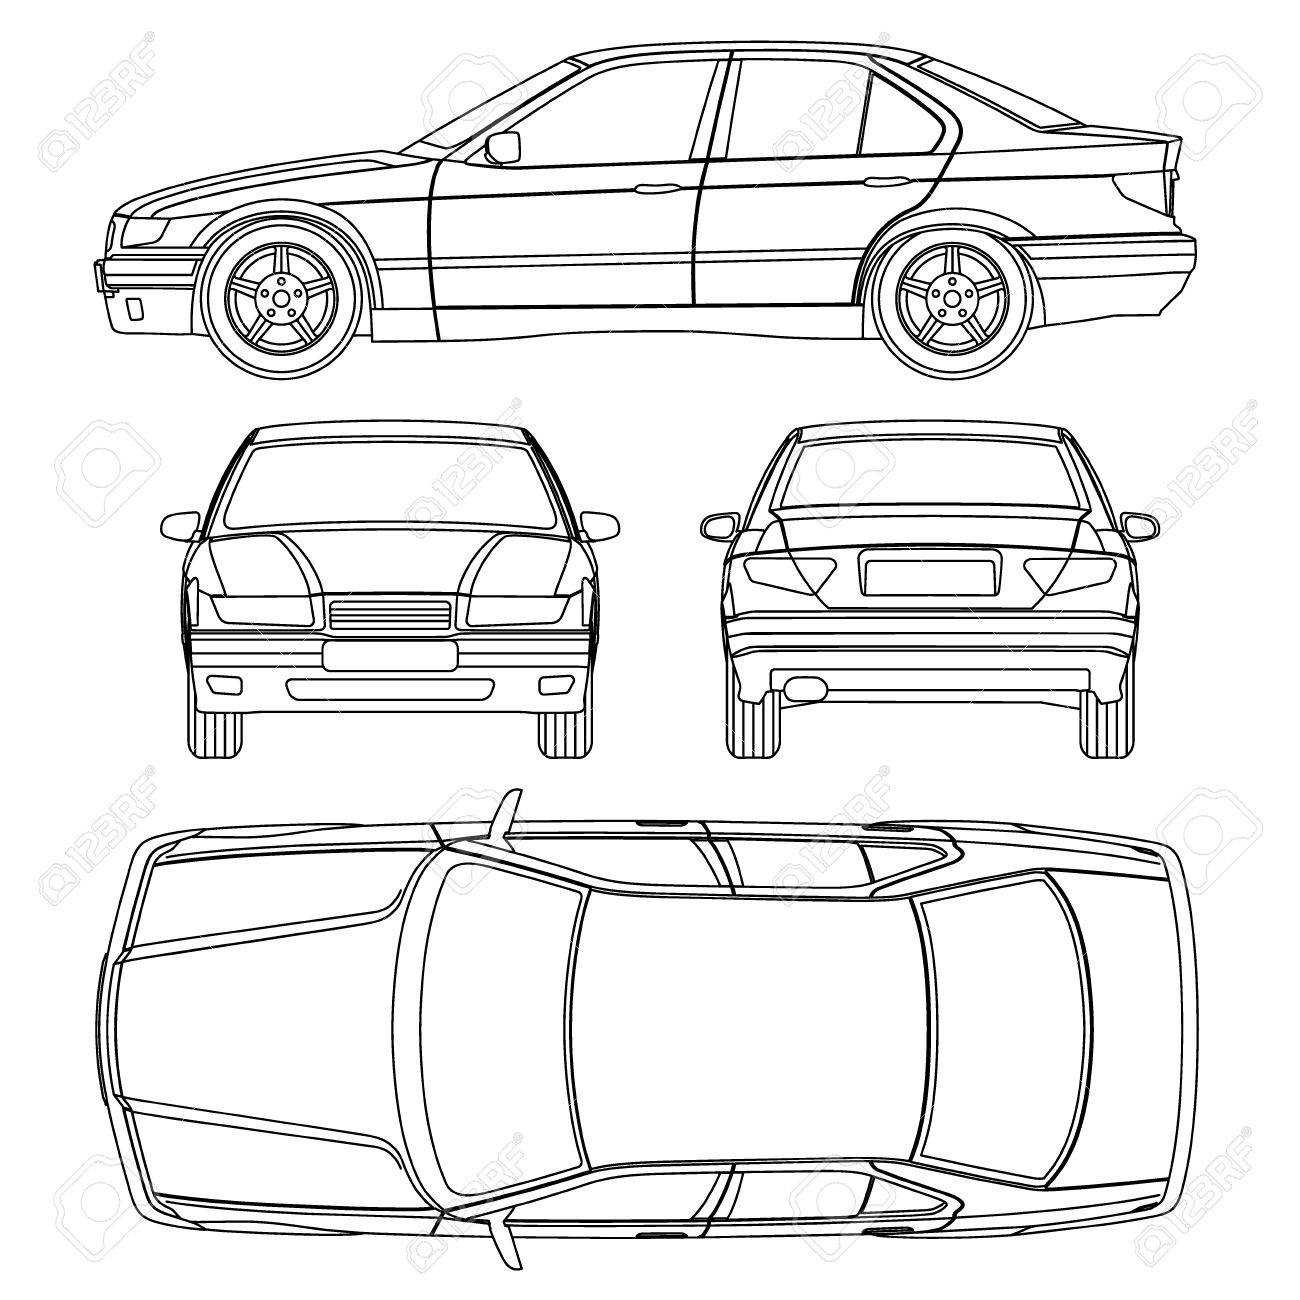 Car Line Draw Insurance Damage, Condition Report Form For Car Damage Report Template